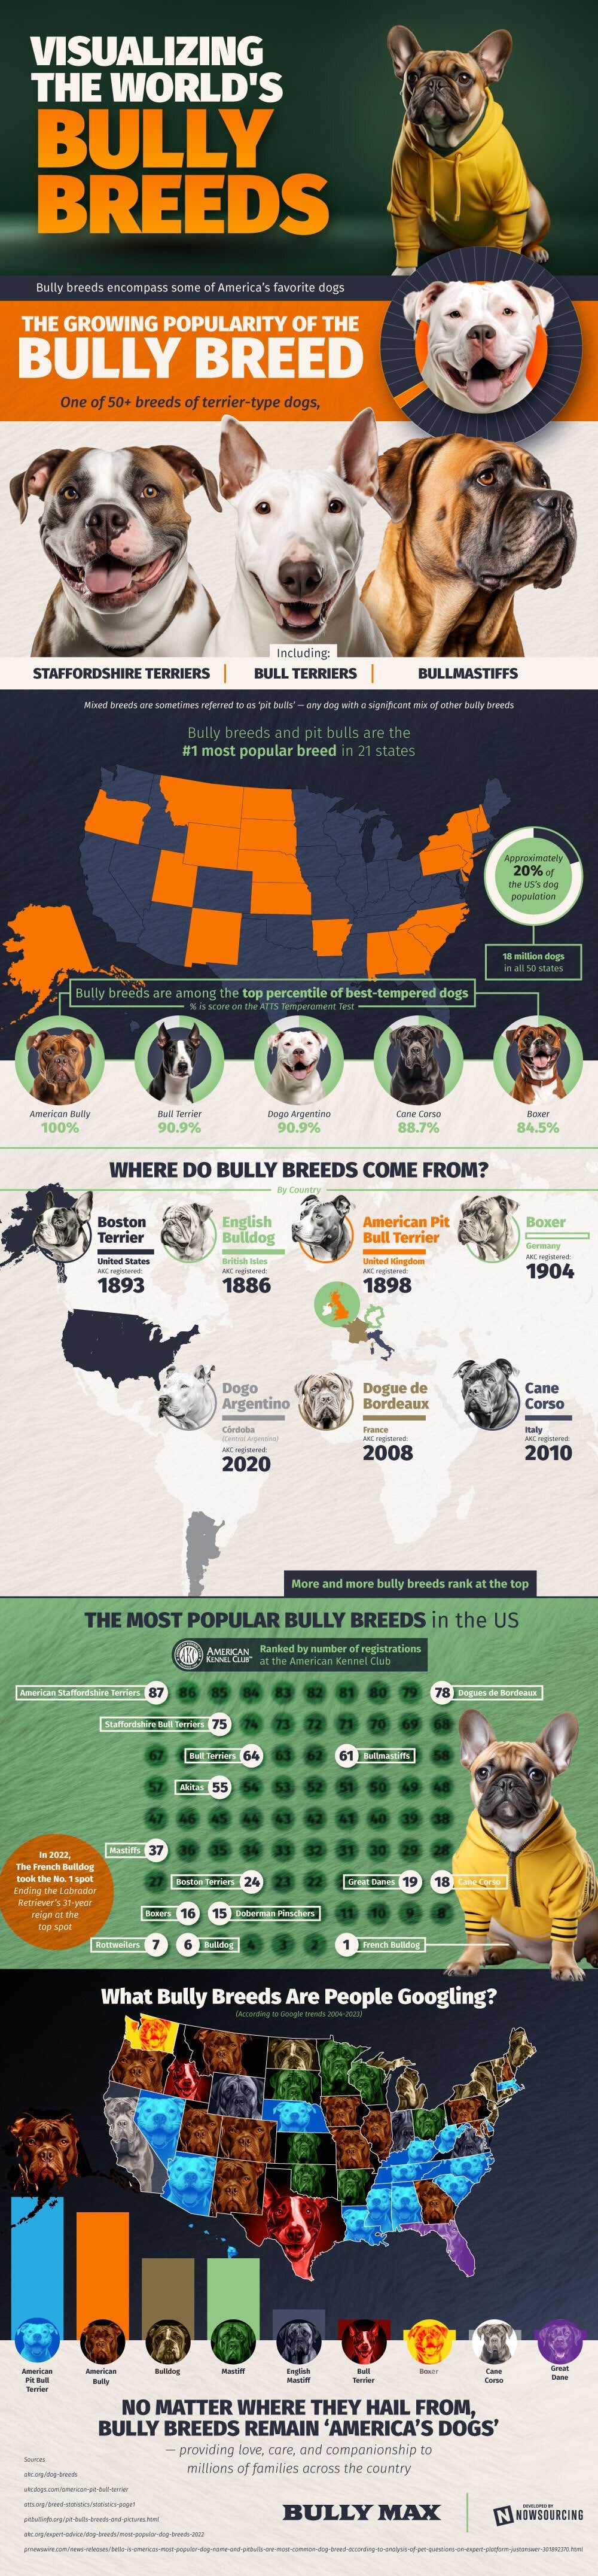 The Most Popular Bully Breeds in the United States